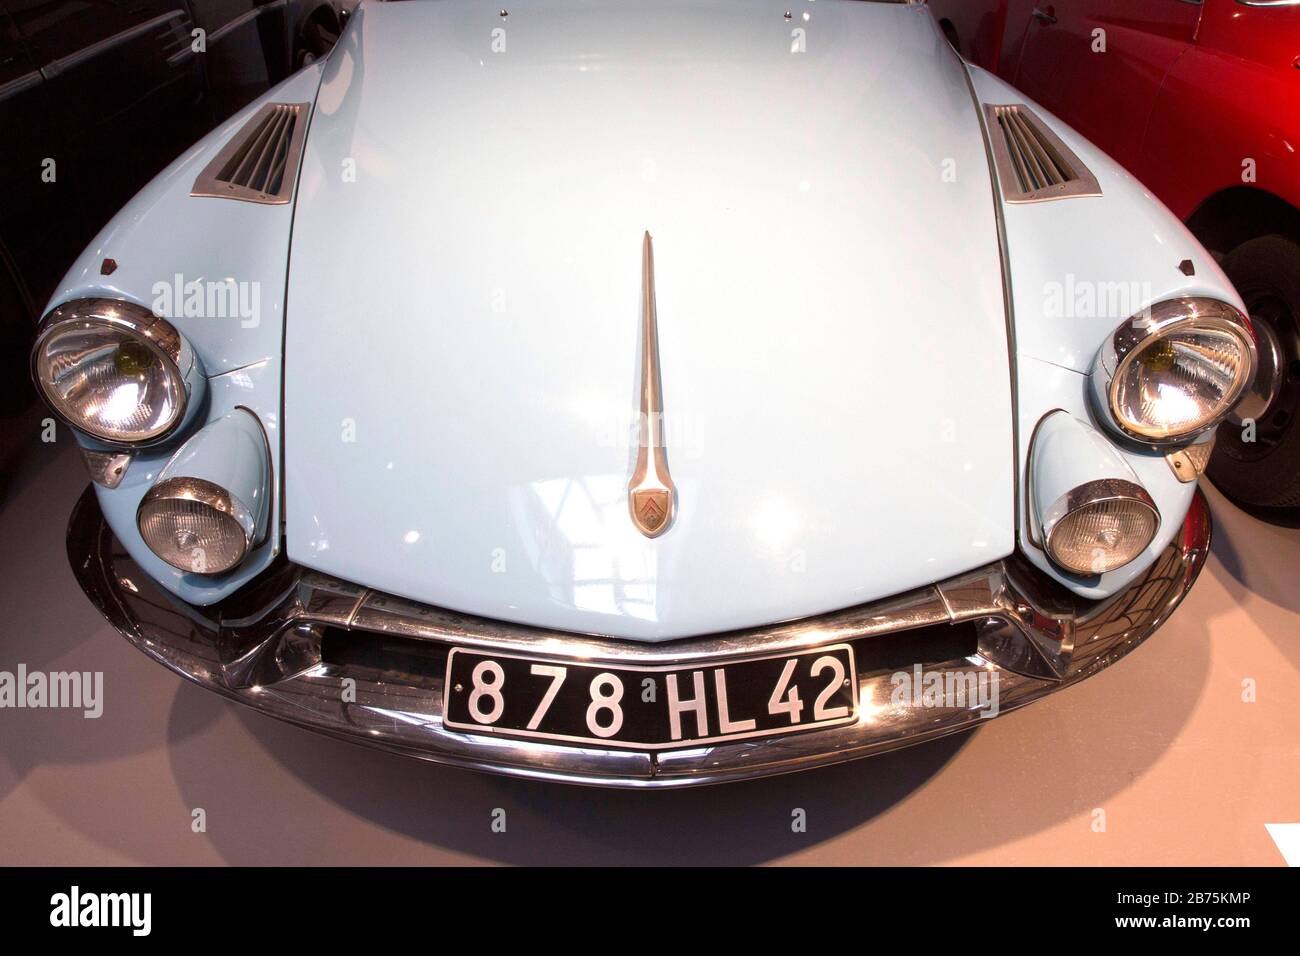 Front view of a Citroes DS 19 in the exhibition of the German Museum of Technology 'Umgeparkt - Autos aus dem Depot' on 05.12.2017 in Berlin. The German Museum of Technology has more than 200 historic old-timer cars. Only about 30 of them are permanently on display in the 'Mensch in Fahrt' exhibition, the other vehicles are in the museum depot. Due to reconstruction work in the depots, there is now the opportunity to briefly see 29 more vehicles from the collection in the Museum of Technology. [automated translation] Stock Photo